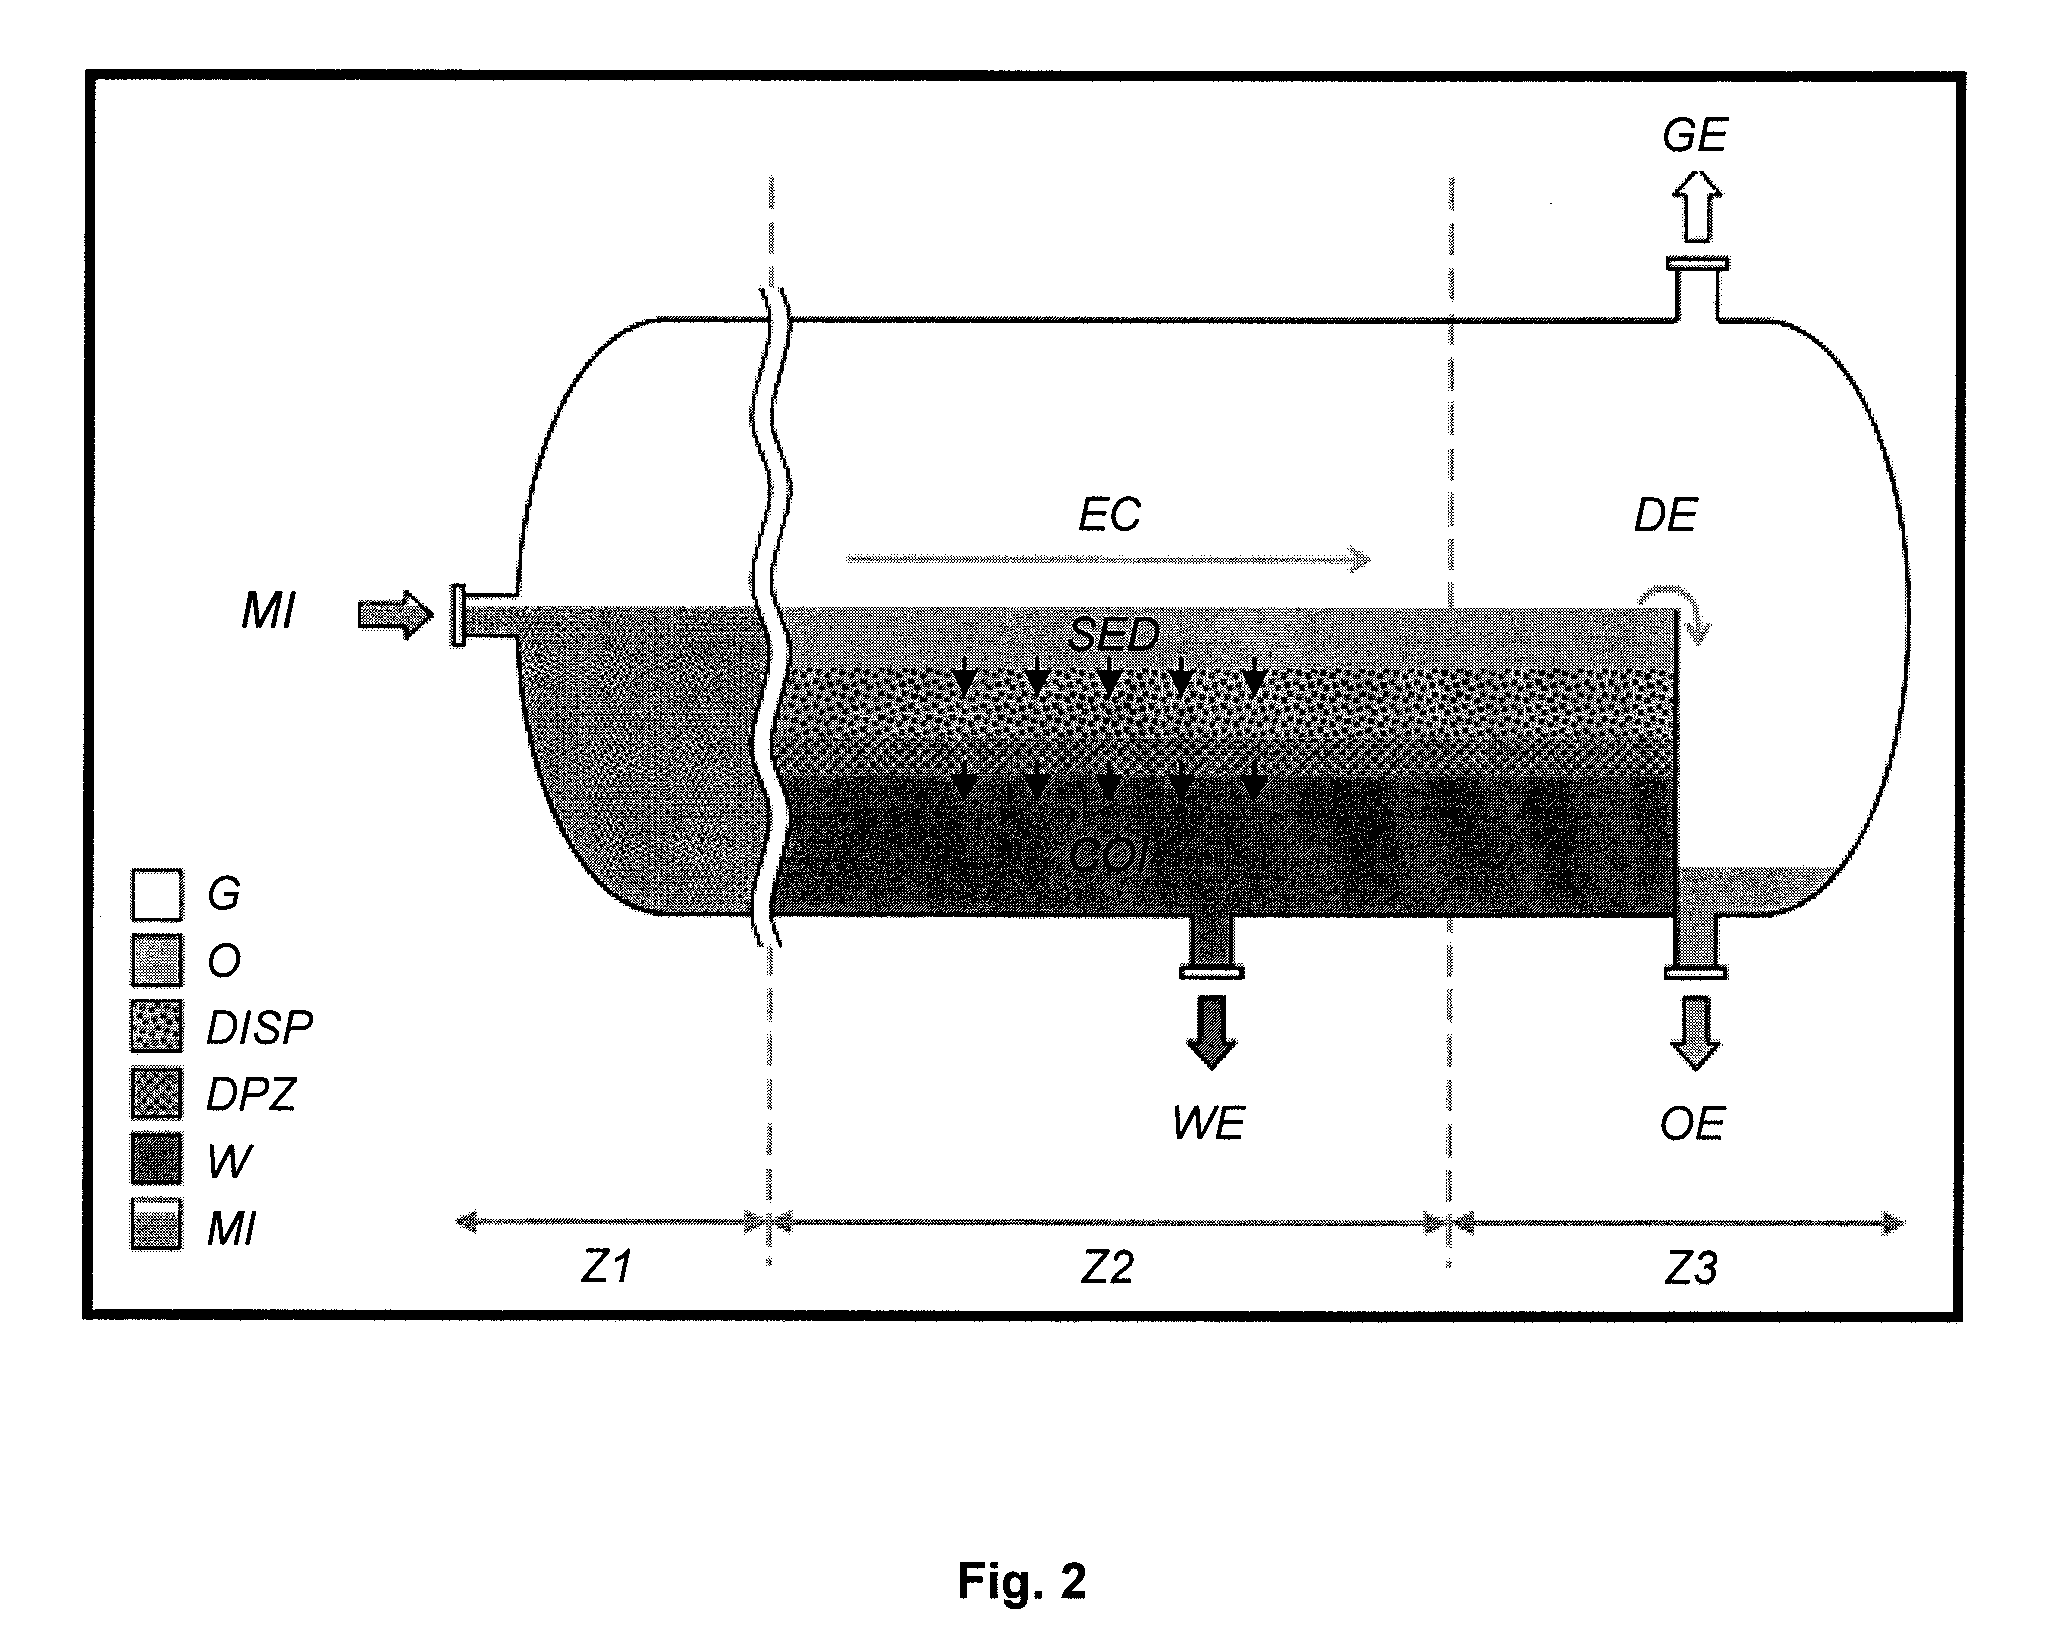 Method of separating two dispersed-phase immiscible liquids